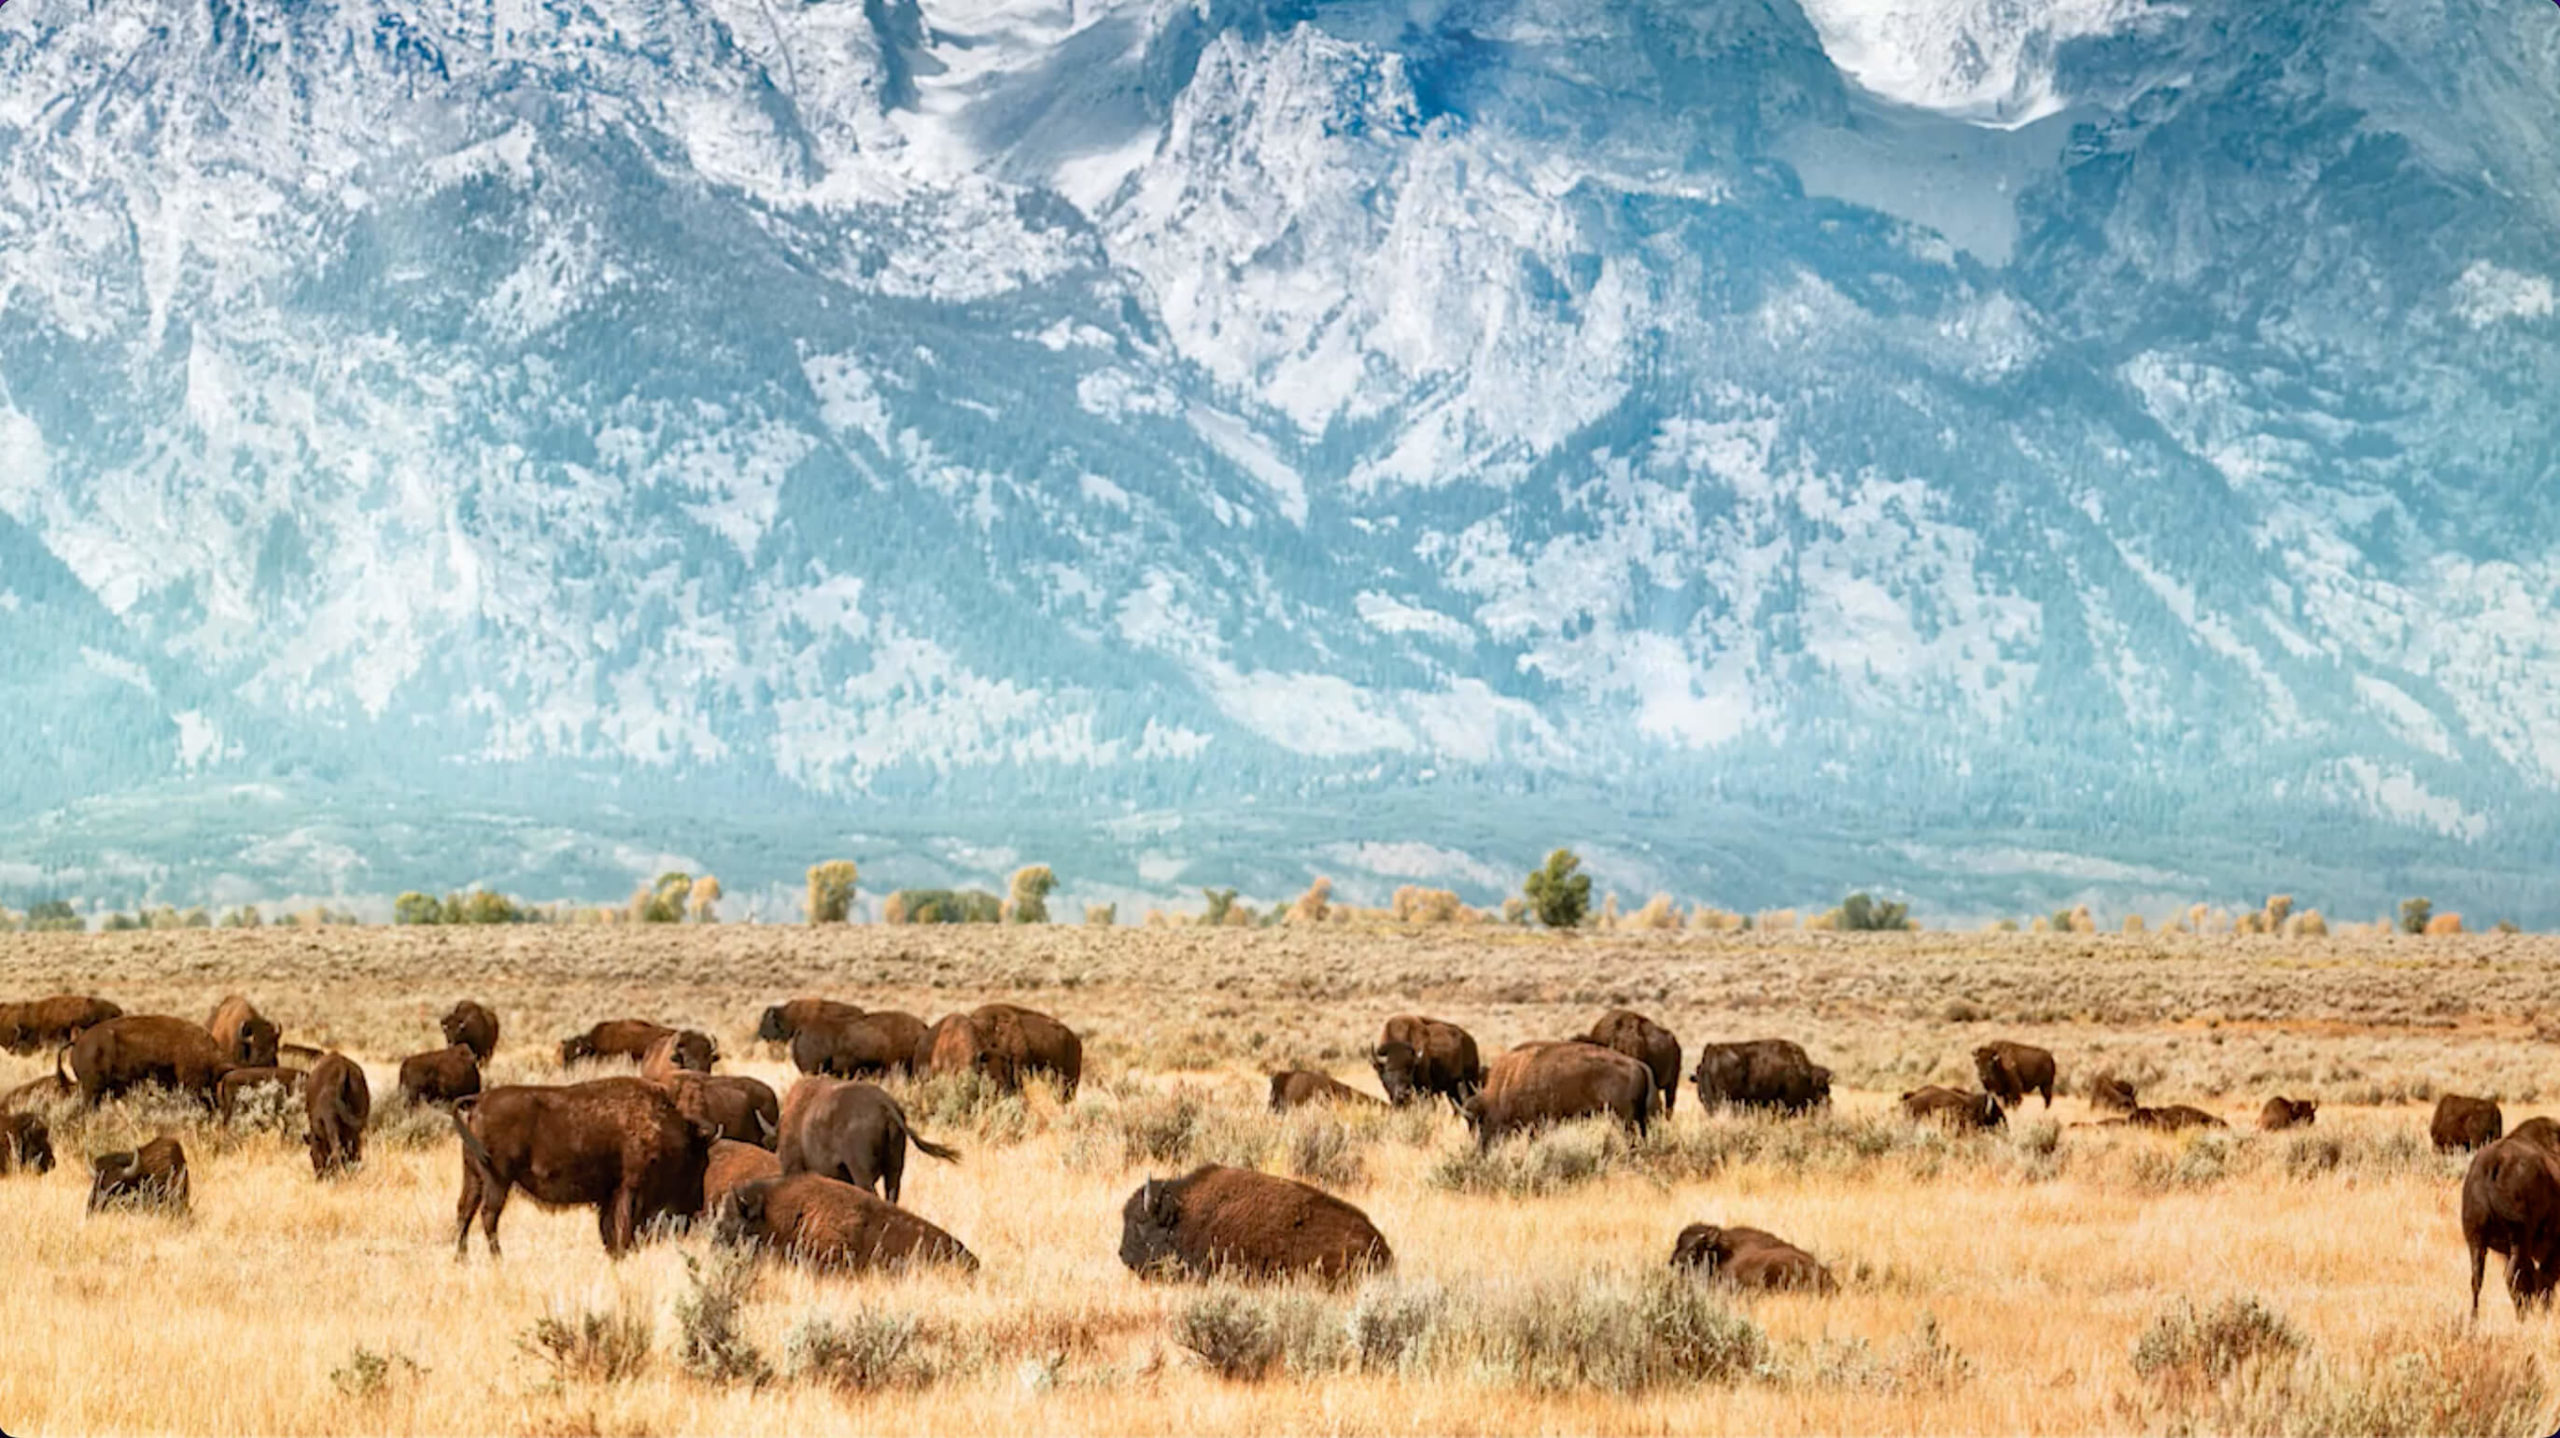 Group of bison in a field in front of a range of snowy mountains